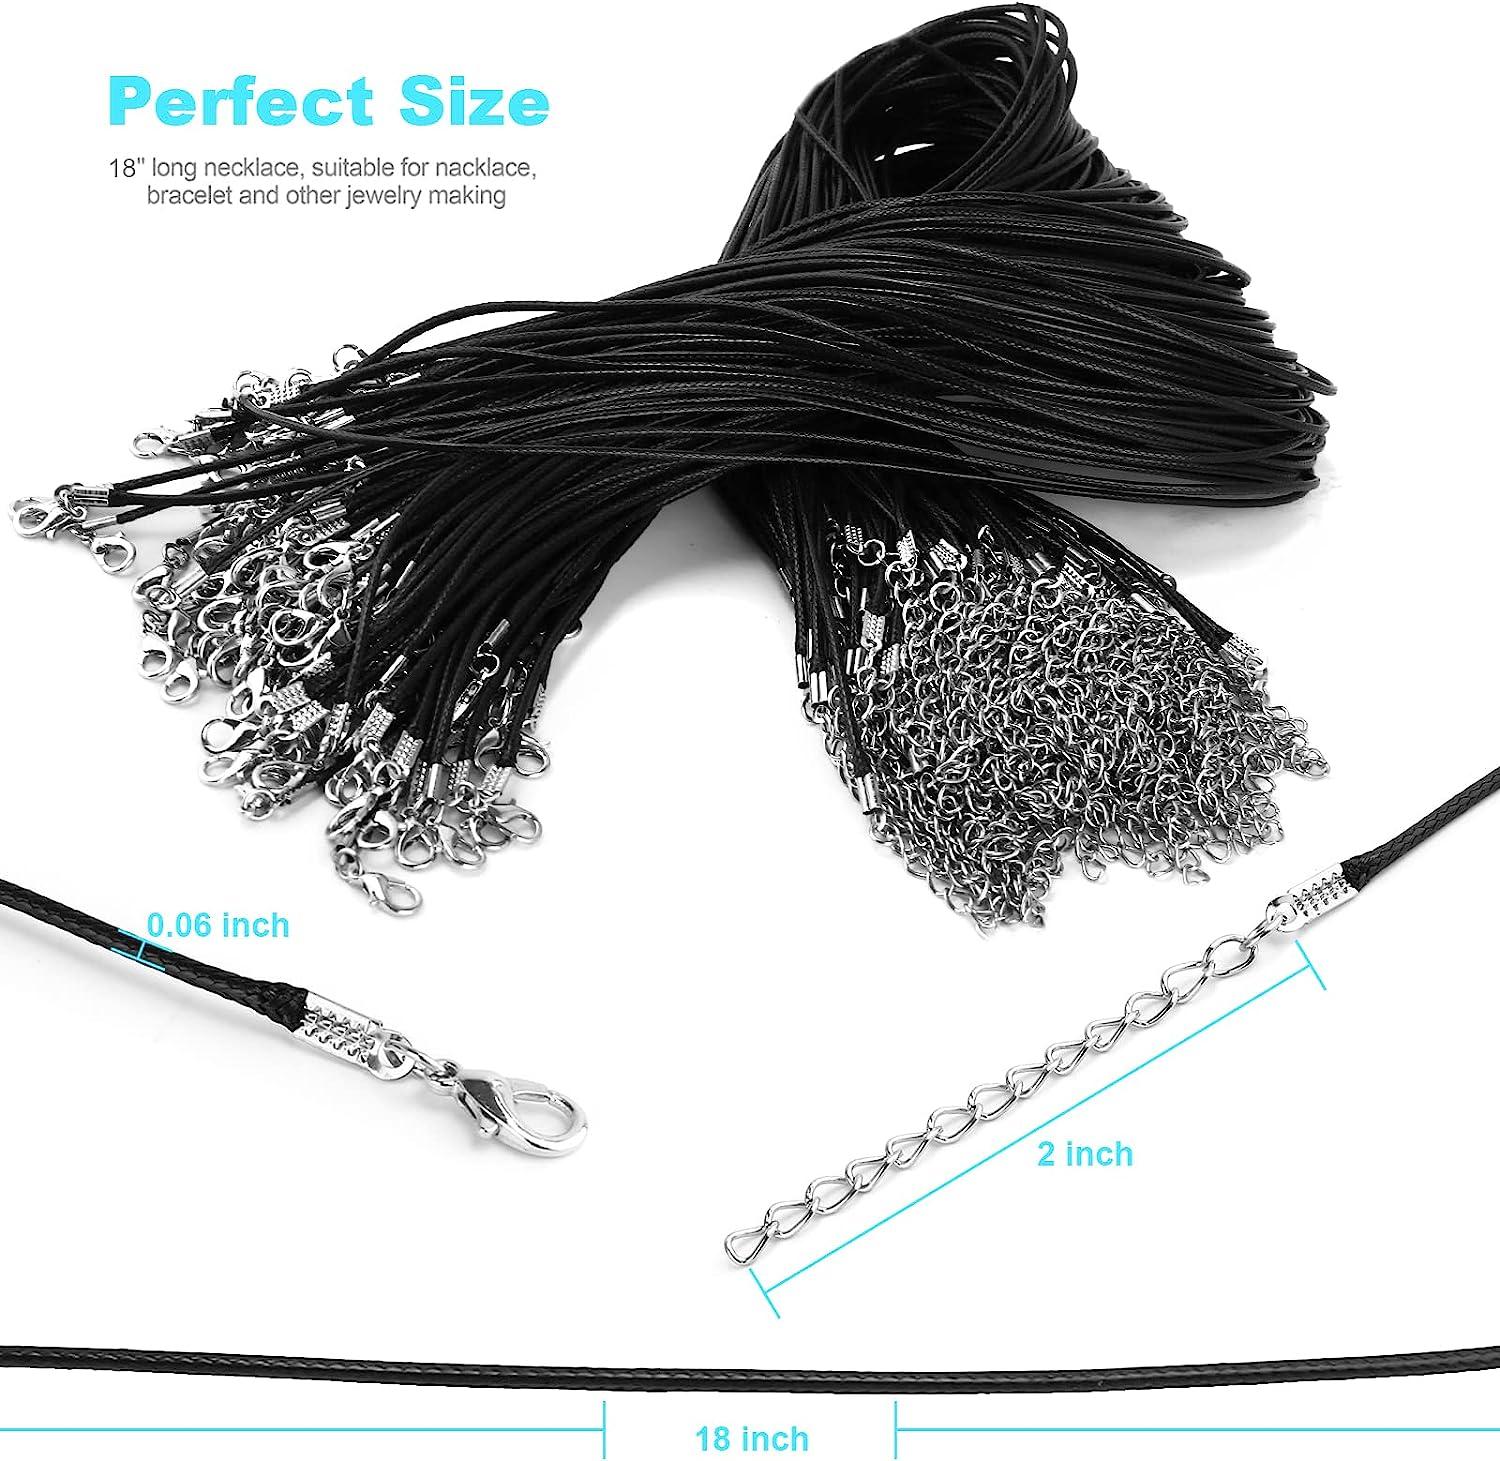 100 Pcs Necklace Cord With Clasp,waxed Necklace Cord Cotton Rope